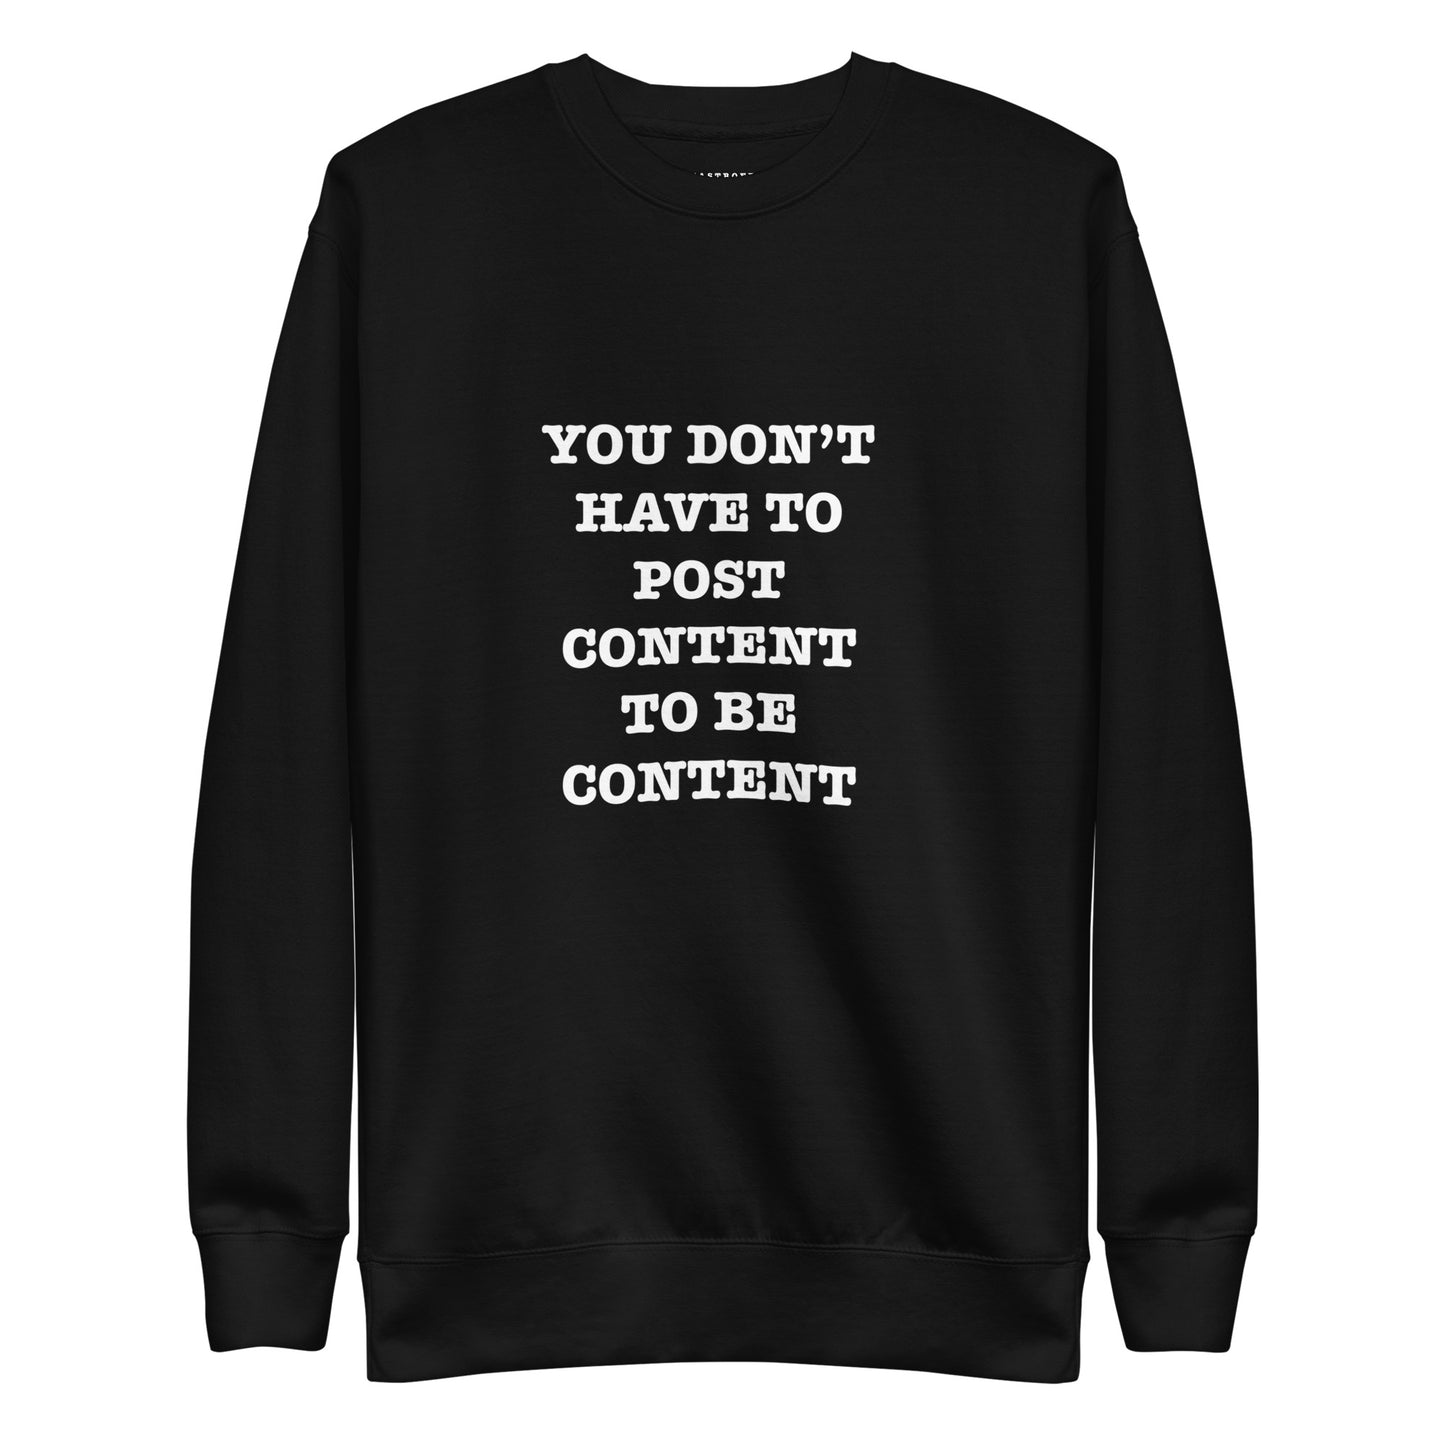 YOU DONT HAVE TO POST CONTENT TO BE CONTENT Katastrofffe Unisex Premium Sweatshirt